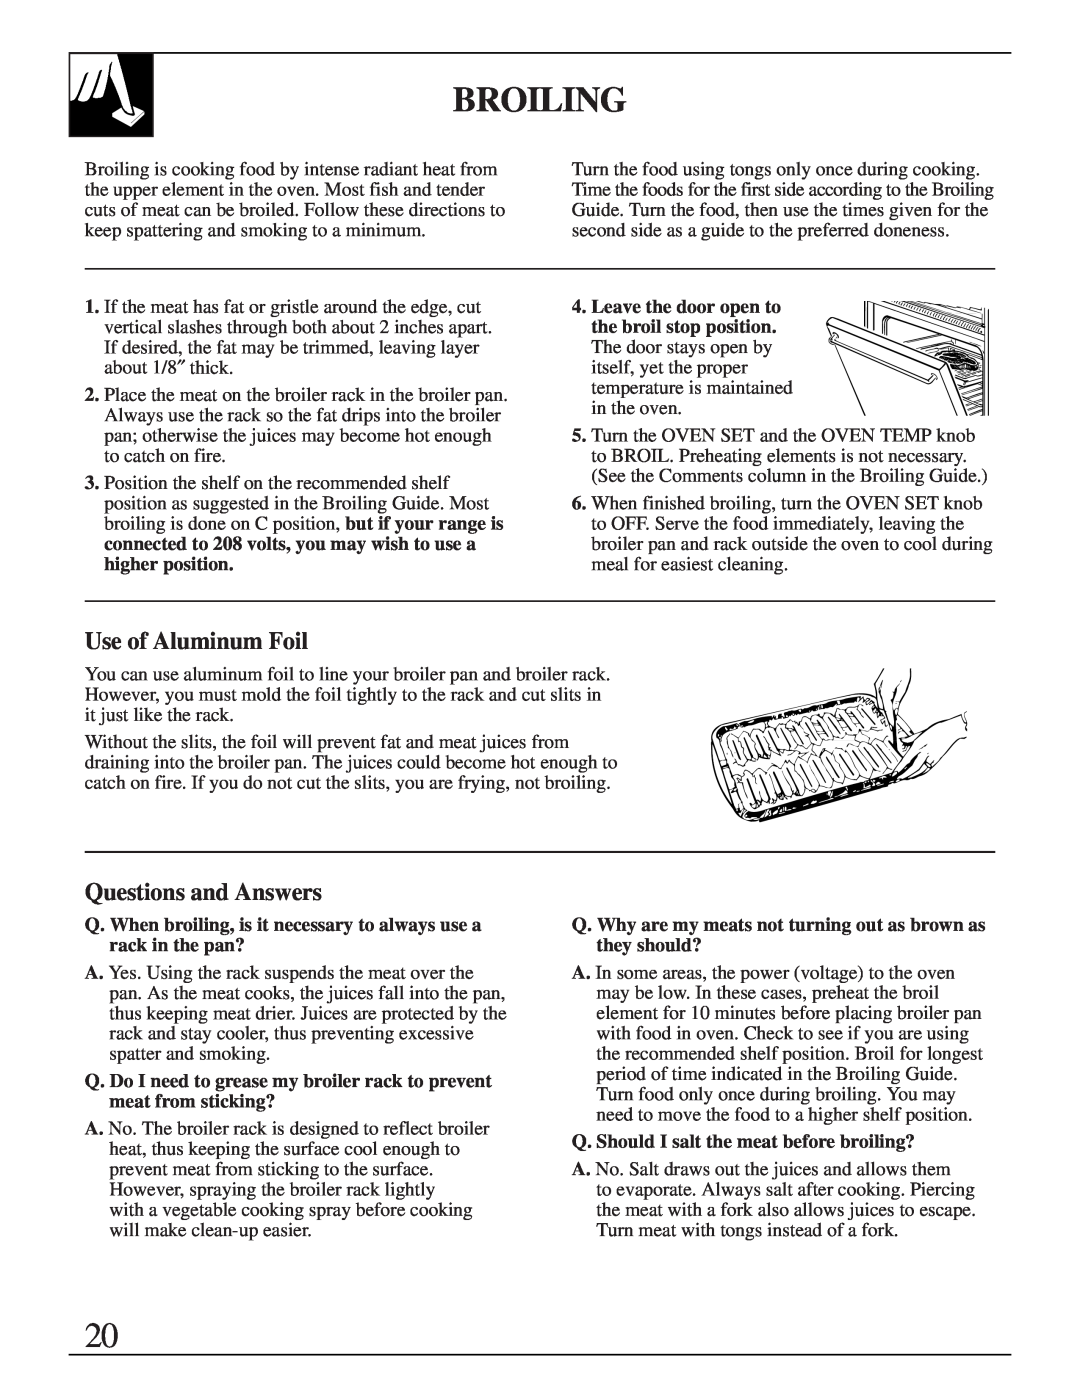 GE JMS10 warranty Broiling, Use of Aluminum Foil, Questions and Answers, Q. Should I salt the meat before broiling? 